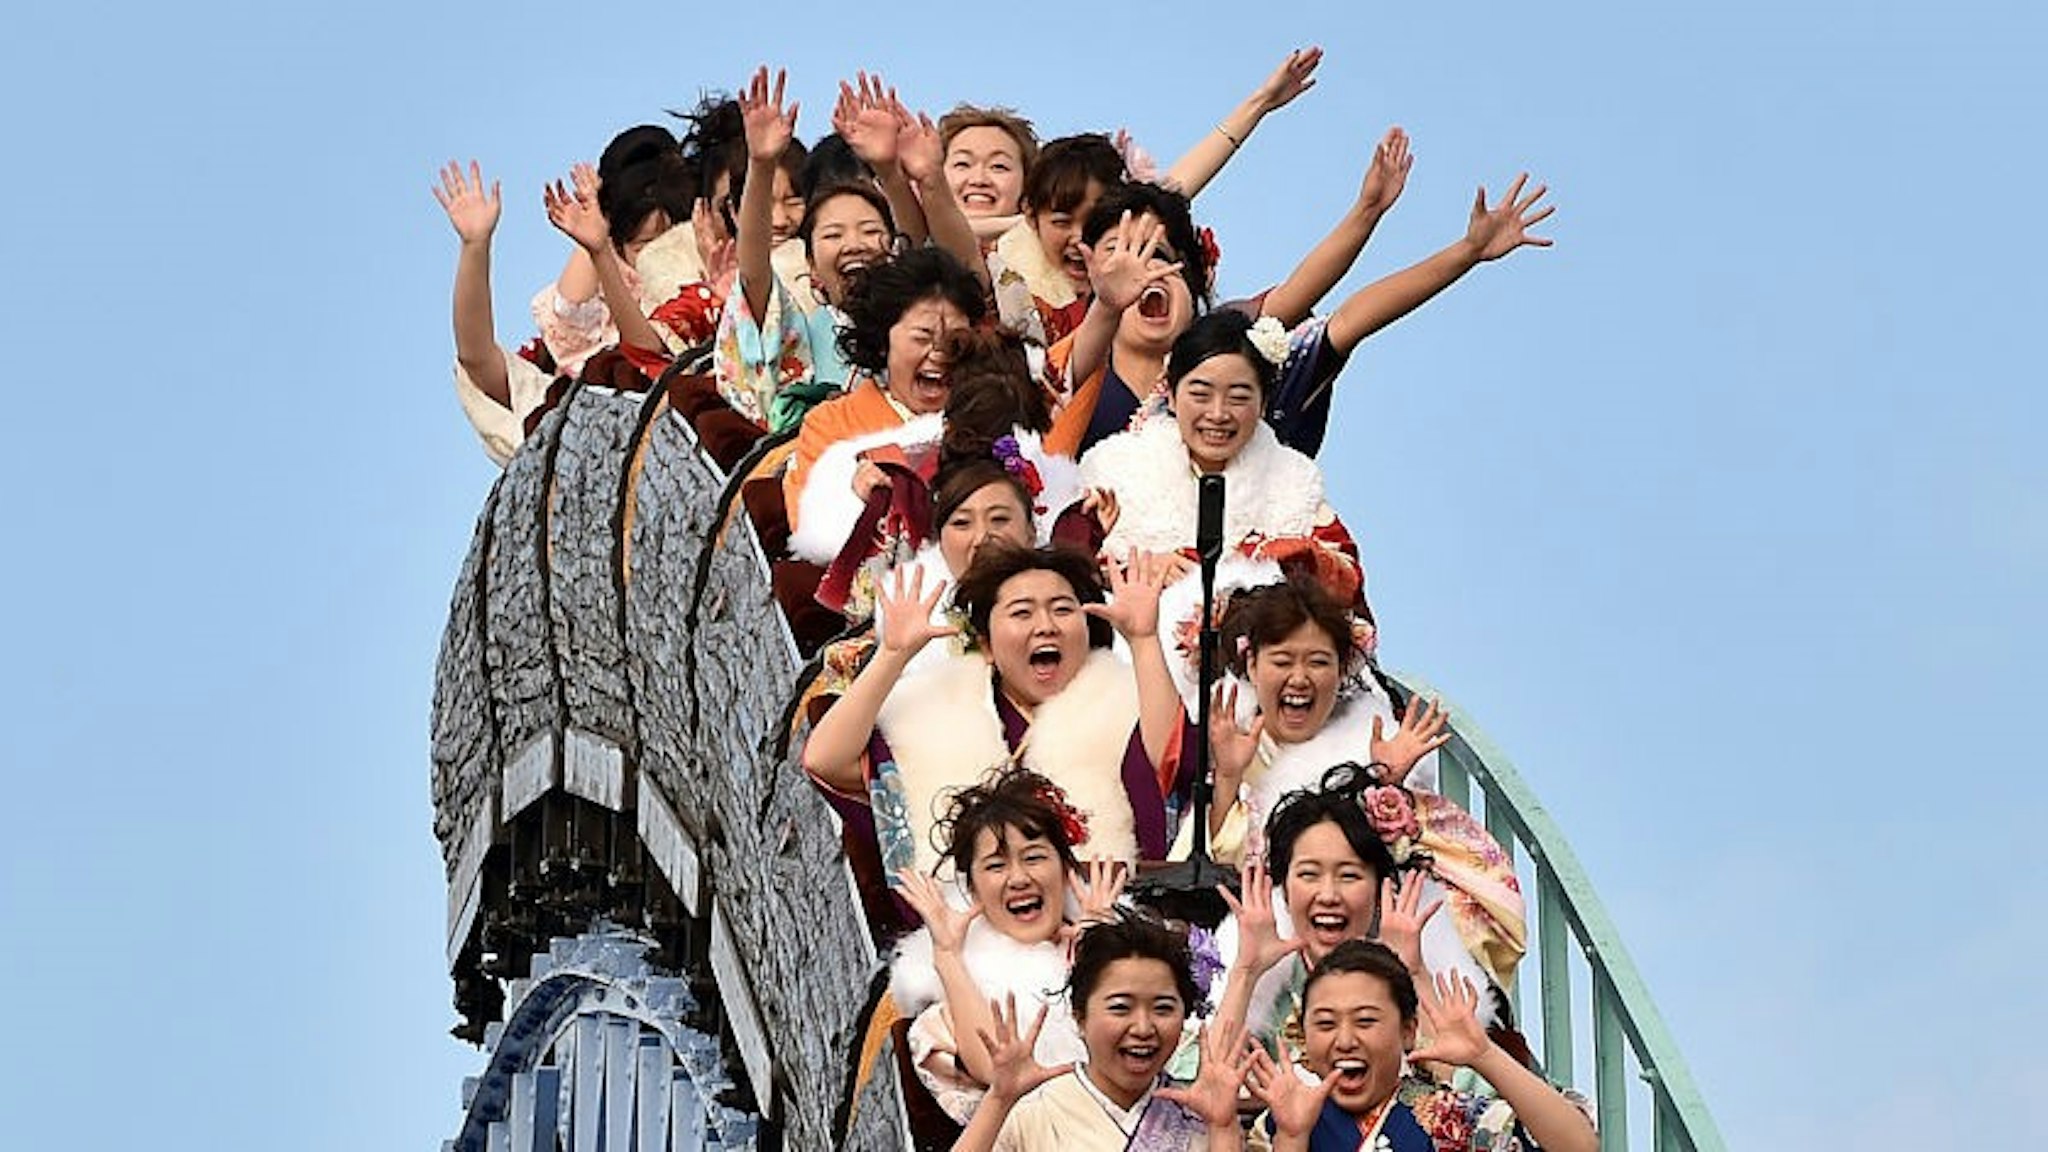 Twenty-year-old women wearing kimonos ride a rollercoaster after attending a "Coming-of-Age Day" celebration at the Toshimaen amusement park in Tokyo on January 11, 2016. The number of people celebrating "Coming-of-Age Day" in 2016, or adulthood - high by world standards at age 20 - is estimated to stand at 1.21 million, a decrease of 50,000 from the previous year. Every January, Japanese turning 20 celebrate Coming of Age Day, in which the new adults dress in formal kimonos, pray at Shinto shrines and hear speeches from local officials on their new responsibilities. / AFP / KAZUHIRO NOGI (Photo credit should read